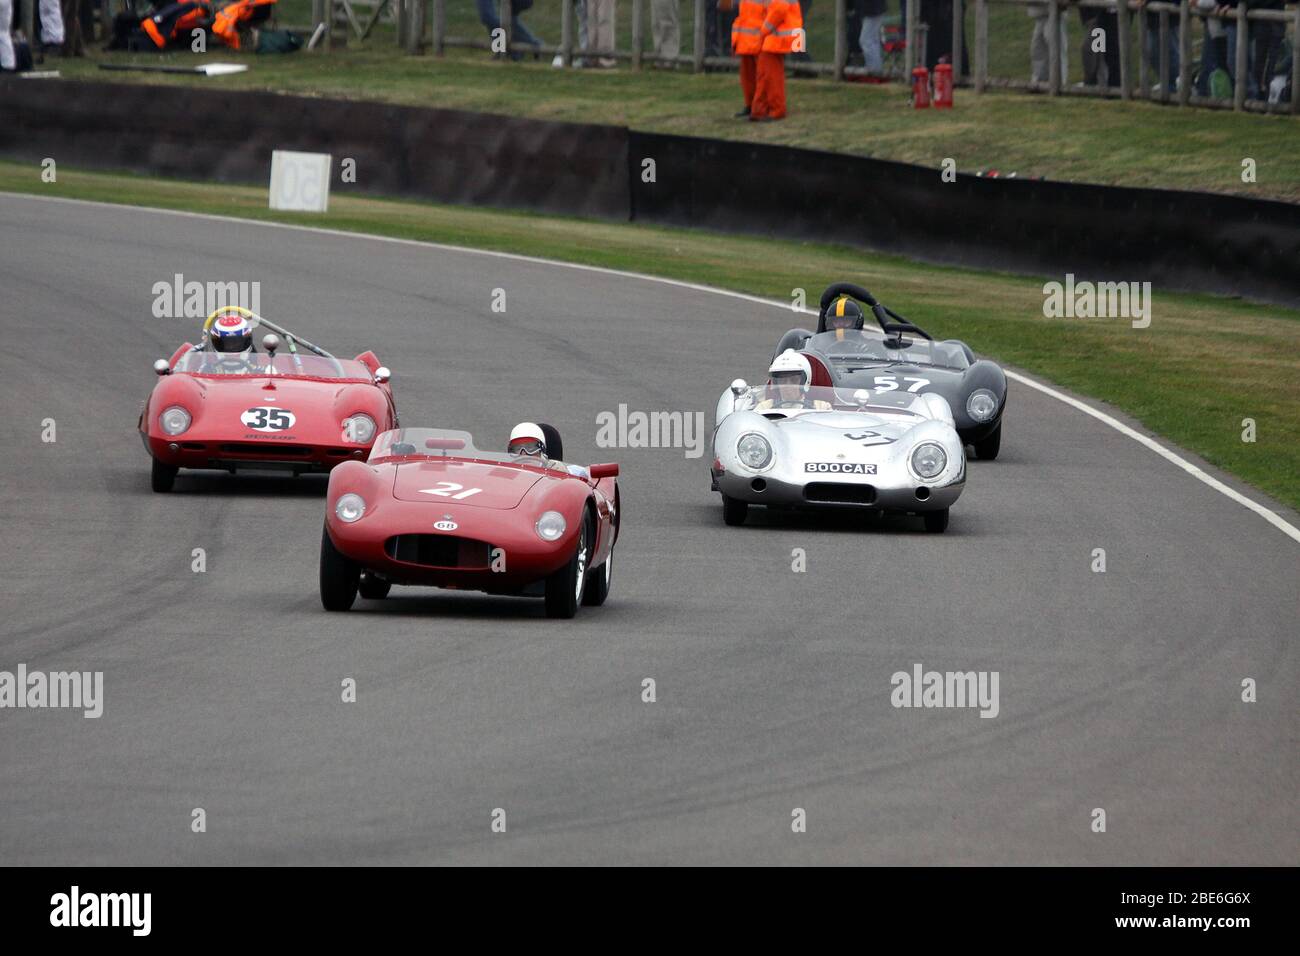 Stirling Moss, 1957 - 1958 OSCA FS 372 Morelli Spider No 21, Goodwood Revival, Goodwood Motor Circuit, West Sussex, UK, 18 September 2009, Photo by Ri Stock Photo